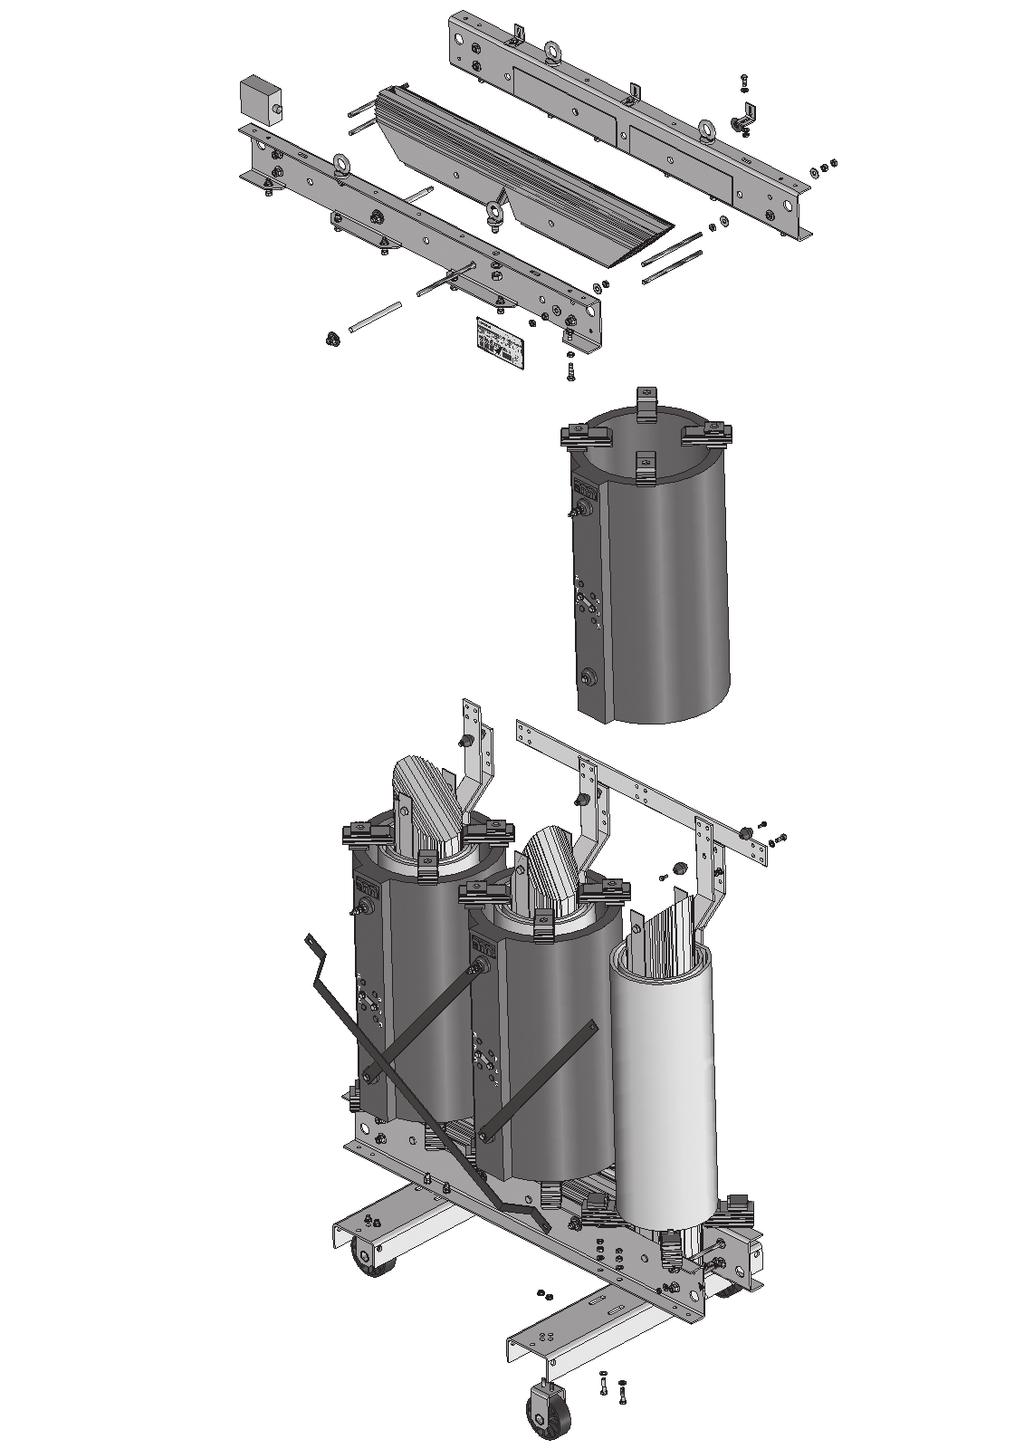 8. Additional information Exploded diagram of a cast resin transformer 19 2 16 15 20 4 11 10 9 8 14 9 3 13 1 7 12 17 6 18 5 1. Magnetic core 2. Upper yoke 3. Core lifting rods 4. Upper core clamps 5.